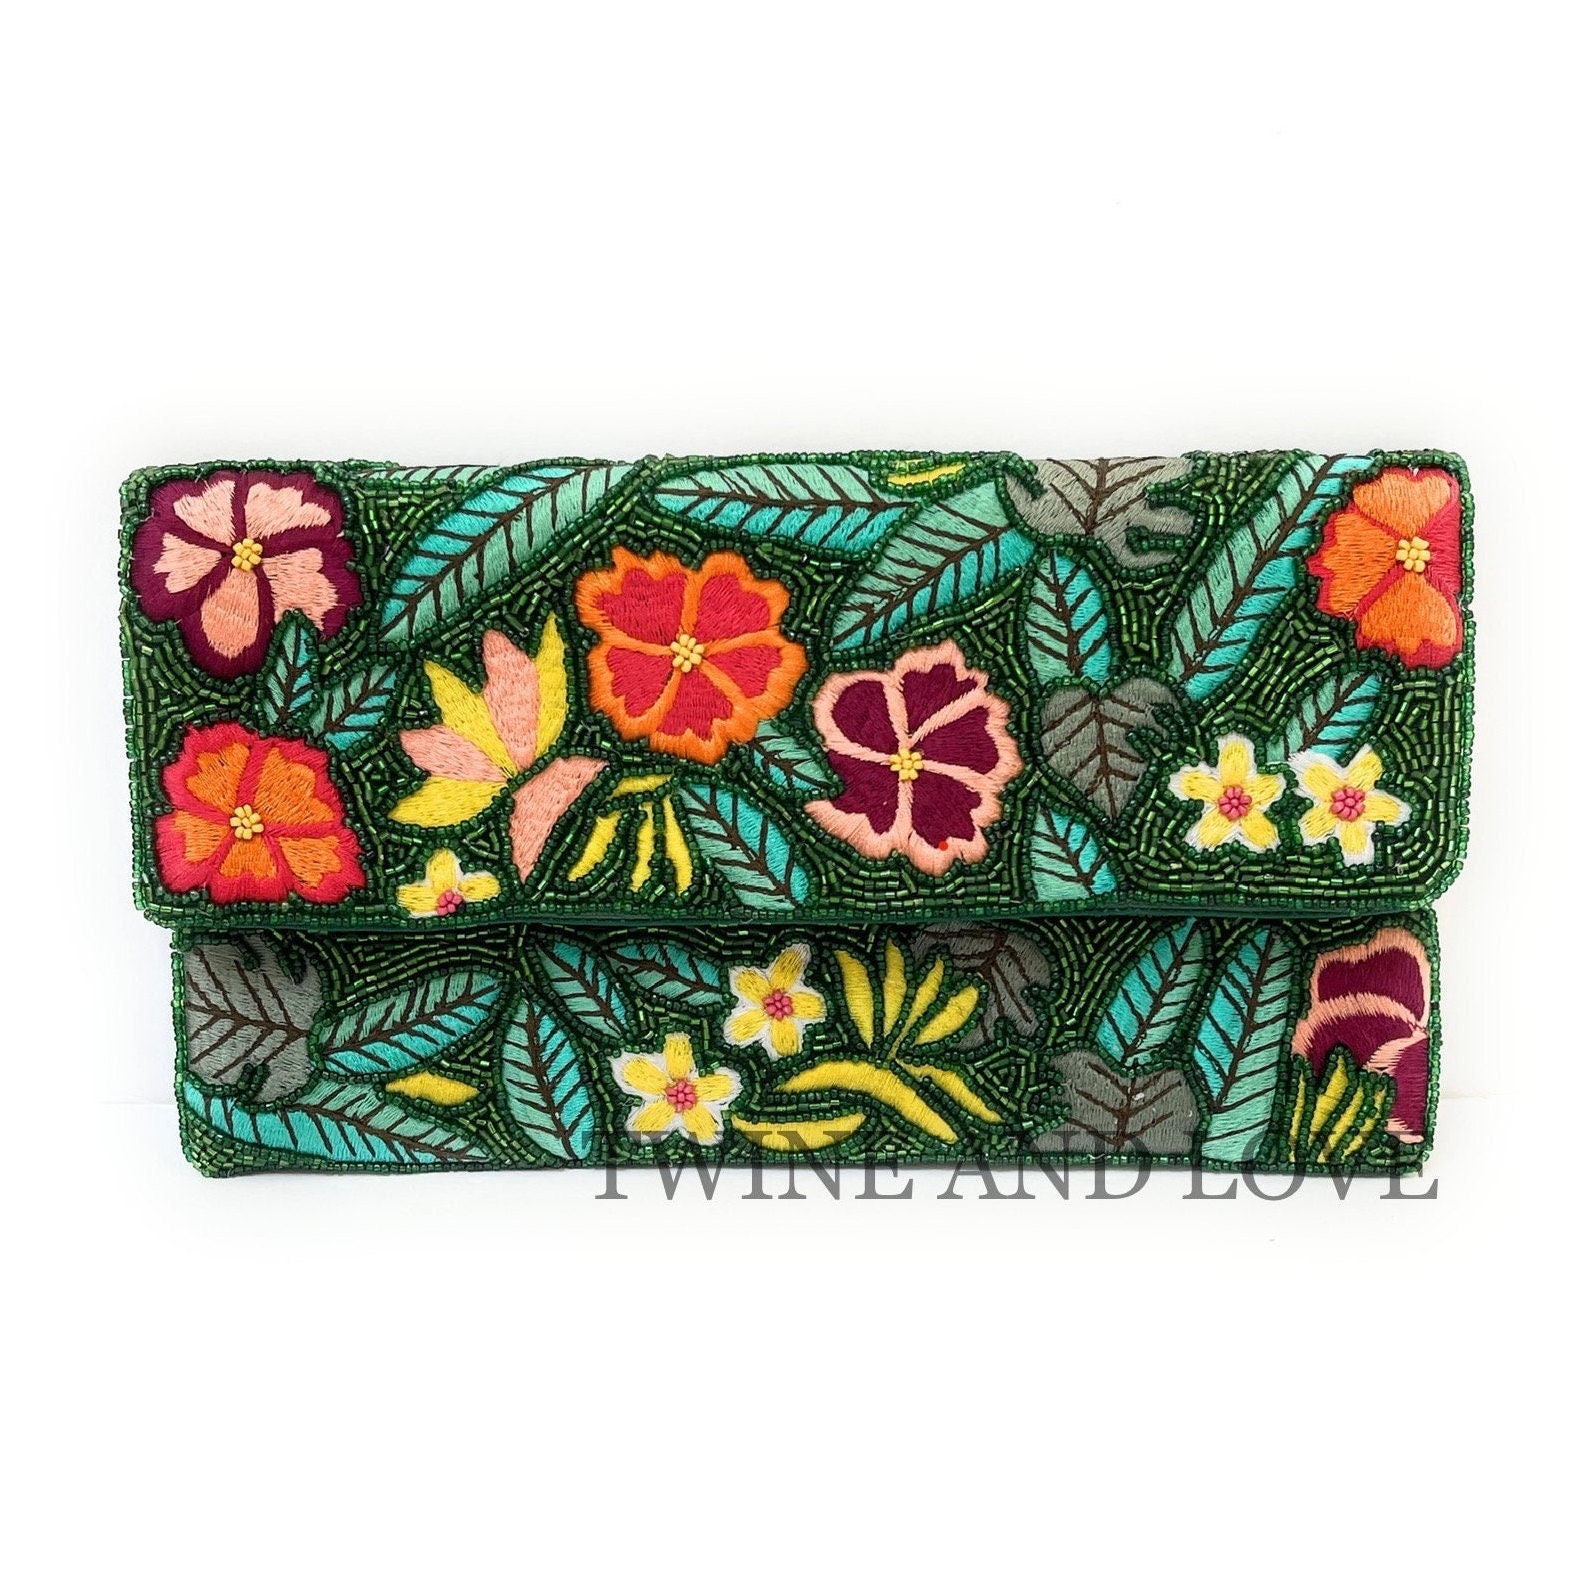 Gets PU Leather Purses and Handbags for Women Floral Beaded Clutch